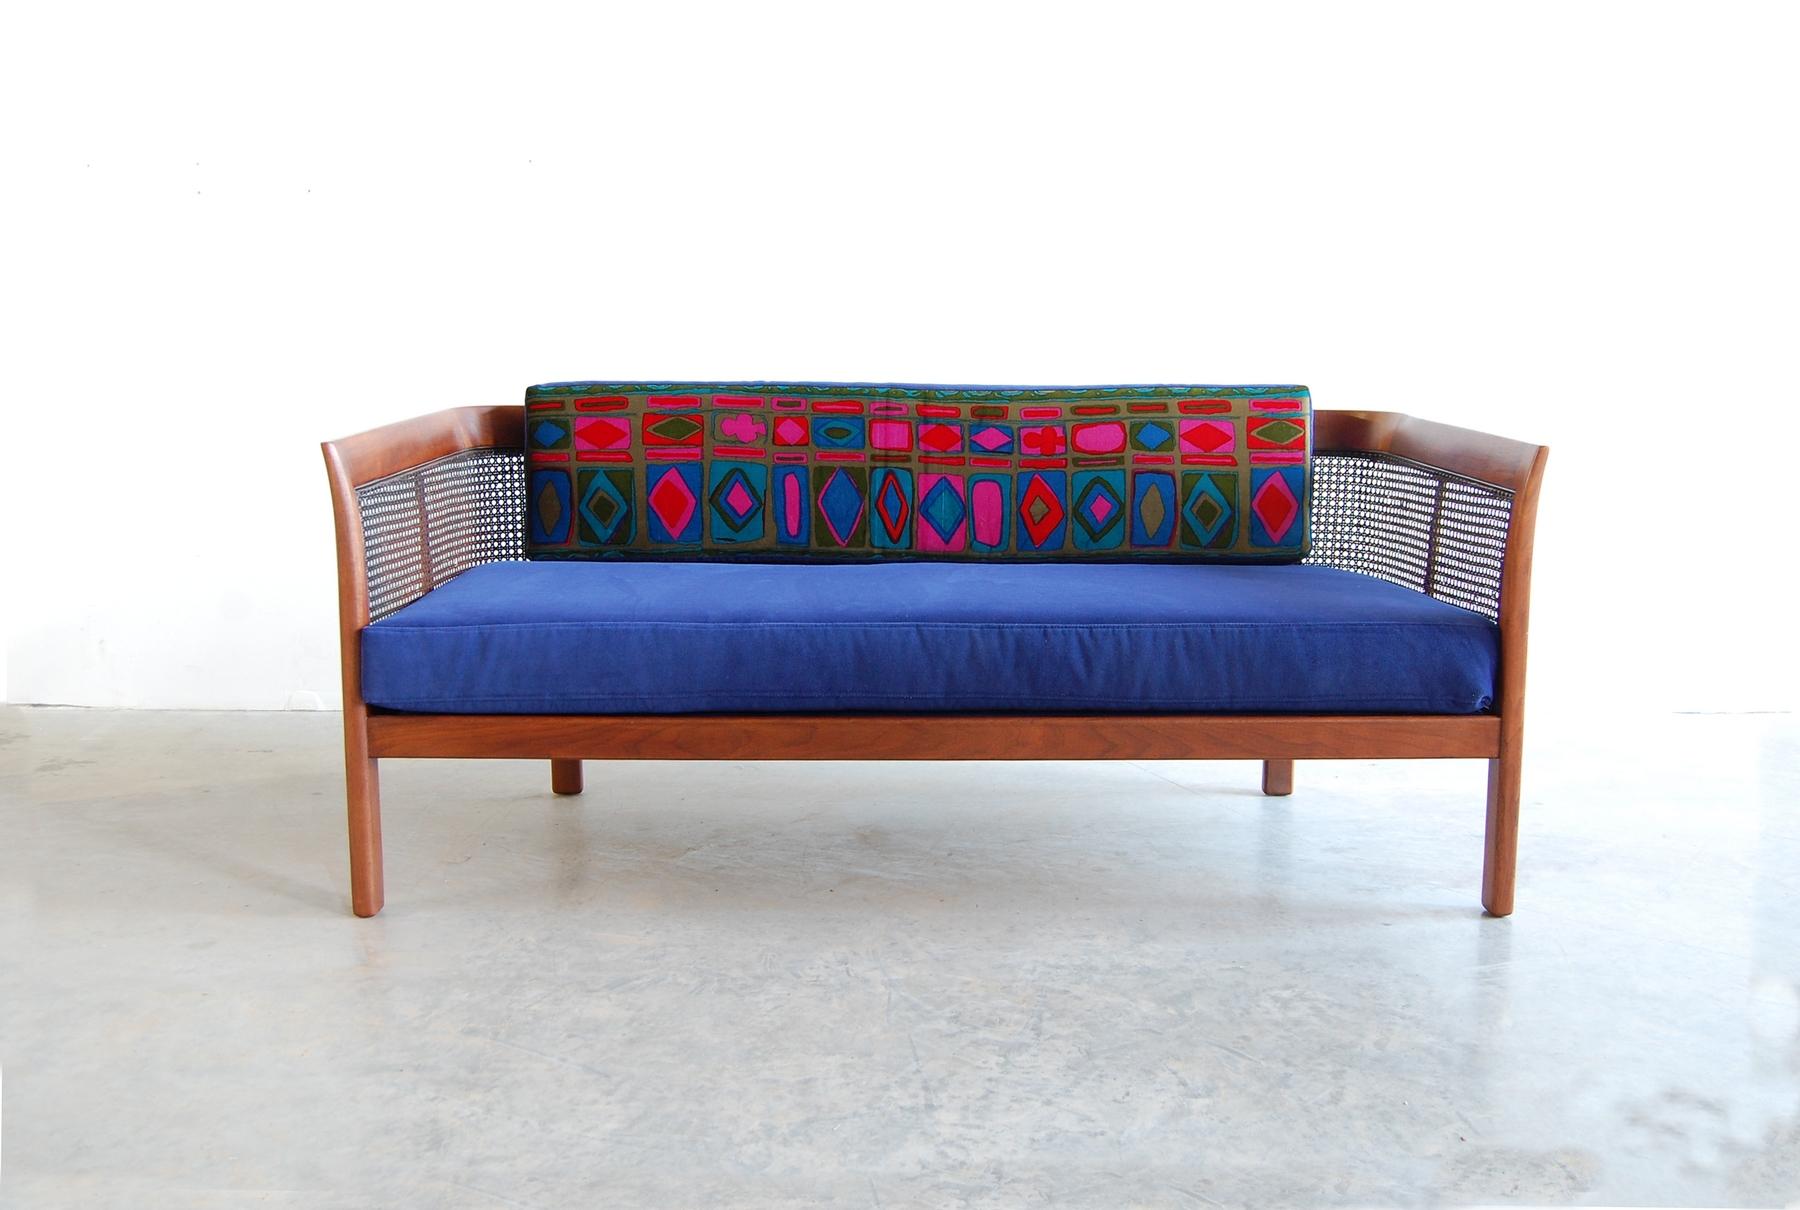 Walnut settee with cane back, circa 1966, by Erwin Lambeth. Newly upholstered, we managed to salvage enough of the Jack Lenor Larsen fabric from its original covering to do the face of the back pillow. If you'd like a swatch of the new blue velvet,